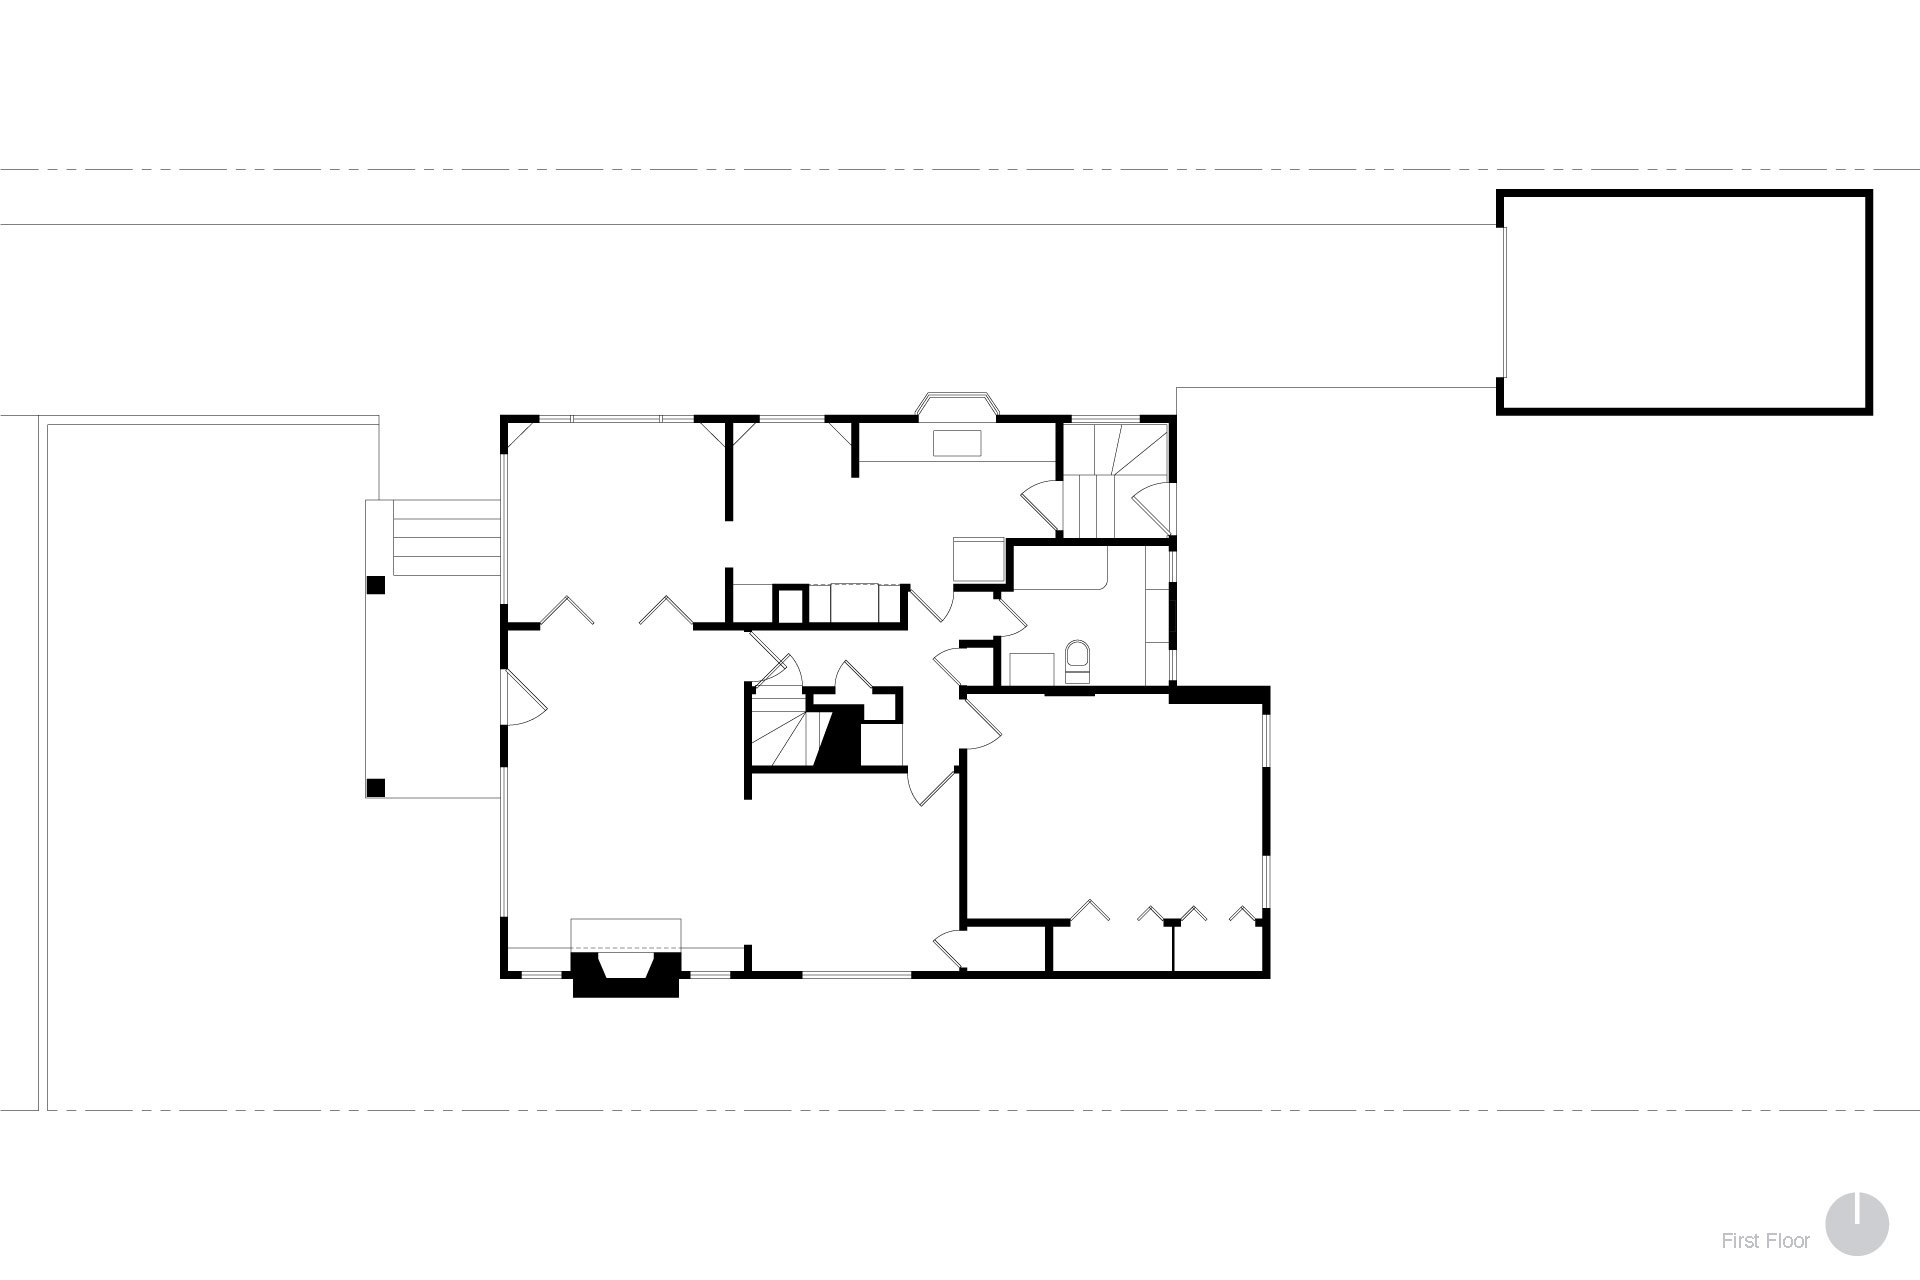 This is a plan drawing of the first floor of the Alameda Craftsman before being renovated.